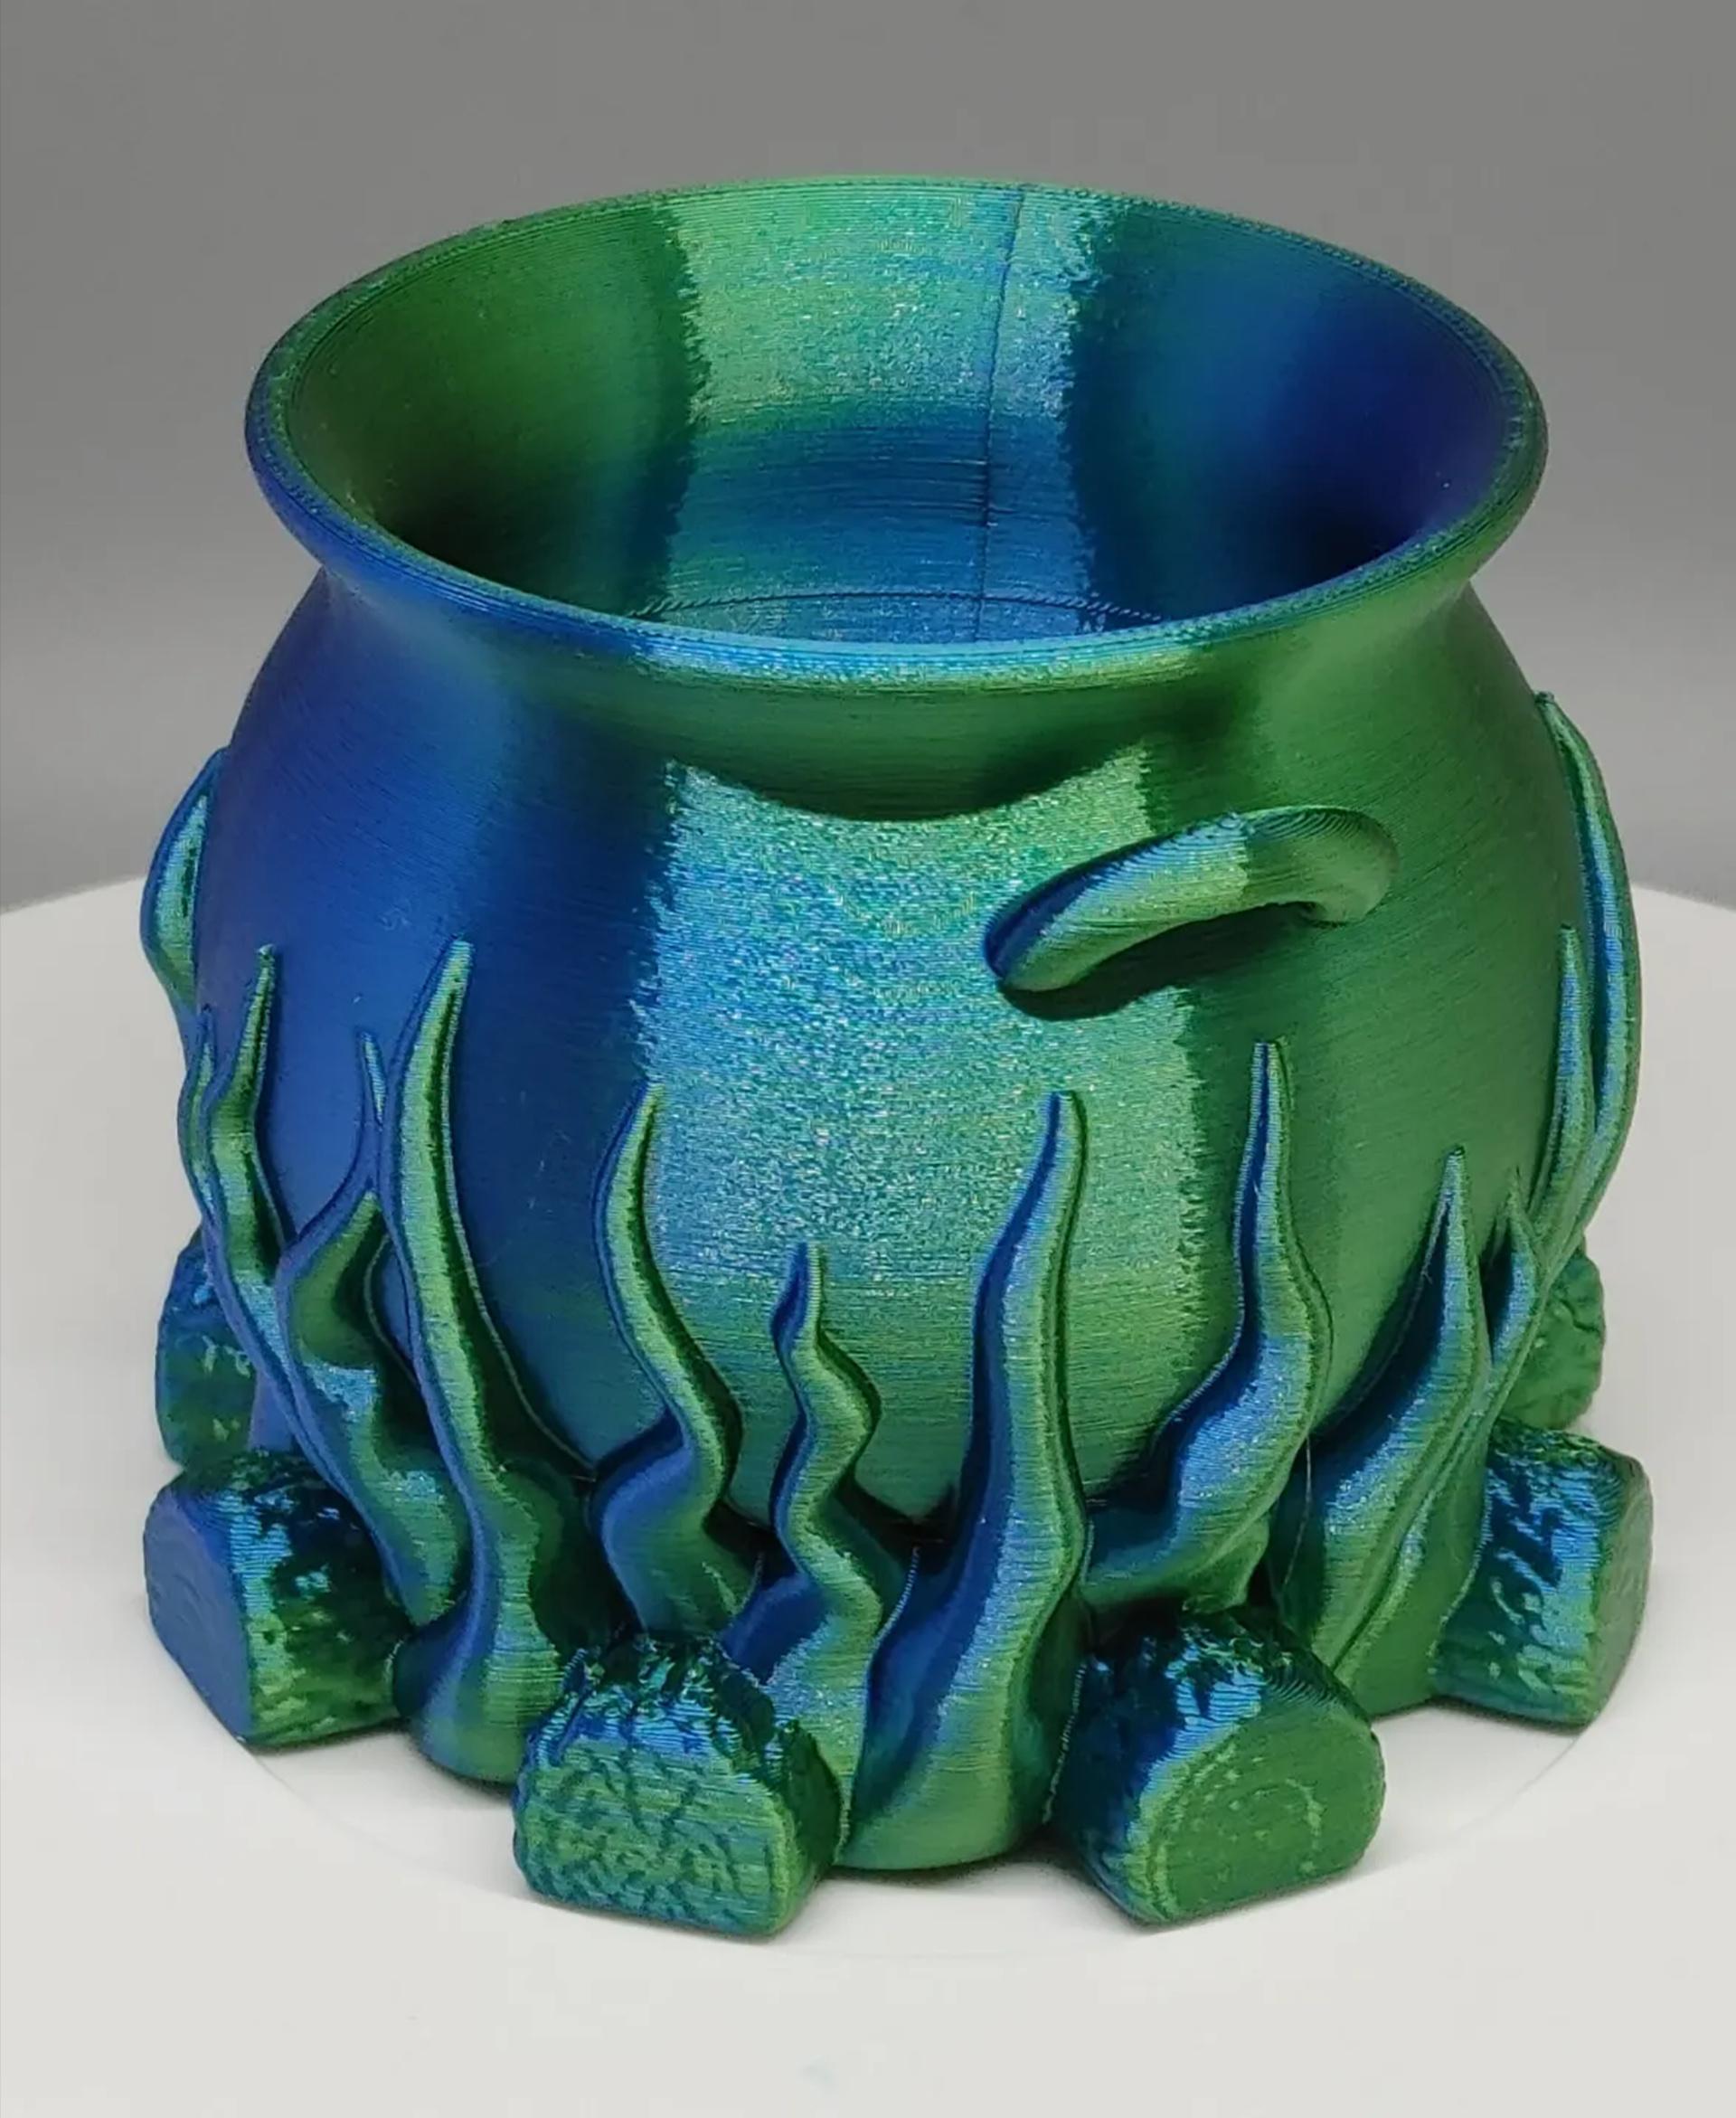 Flaming Cauldron - Another fantastic Halloween model from bugman_140! Printed without supports in Eryone dual color blue/green silk PLA on the MK3S+. I think it turned out beautifully! Such an amazing eye for detail. - 3d model